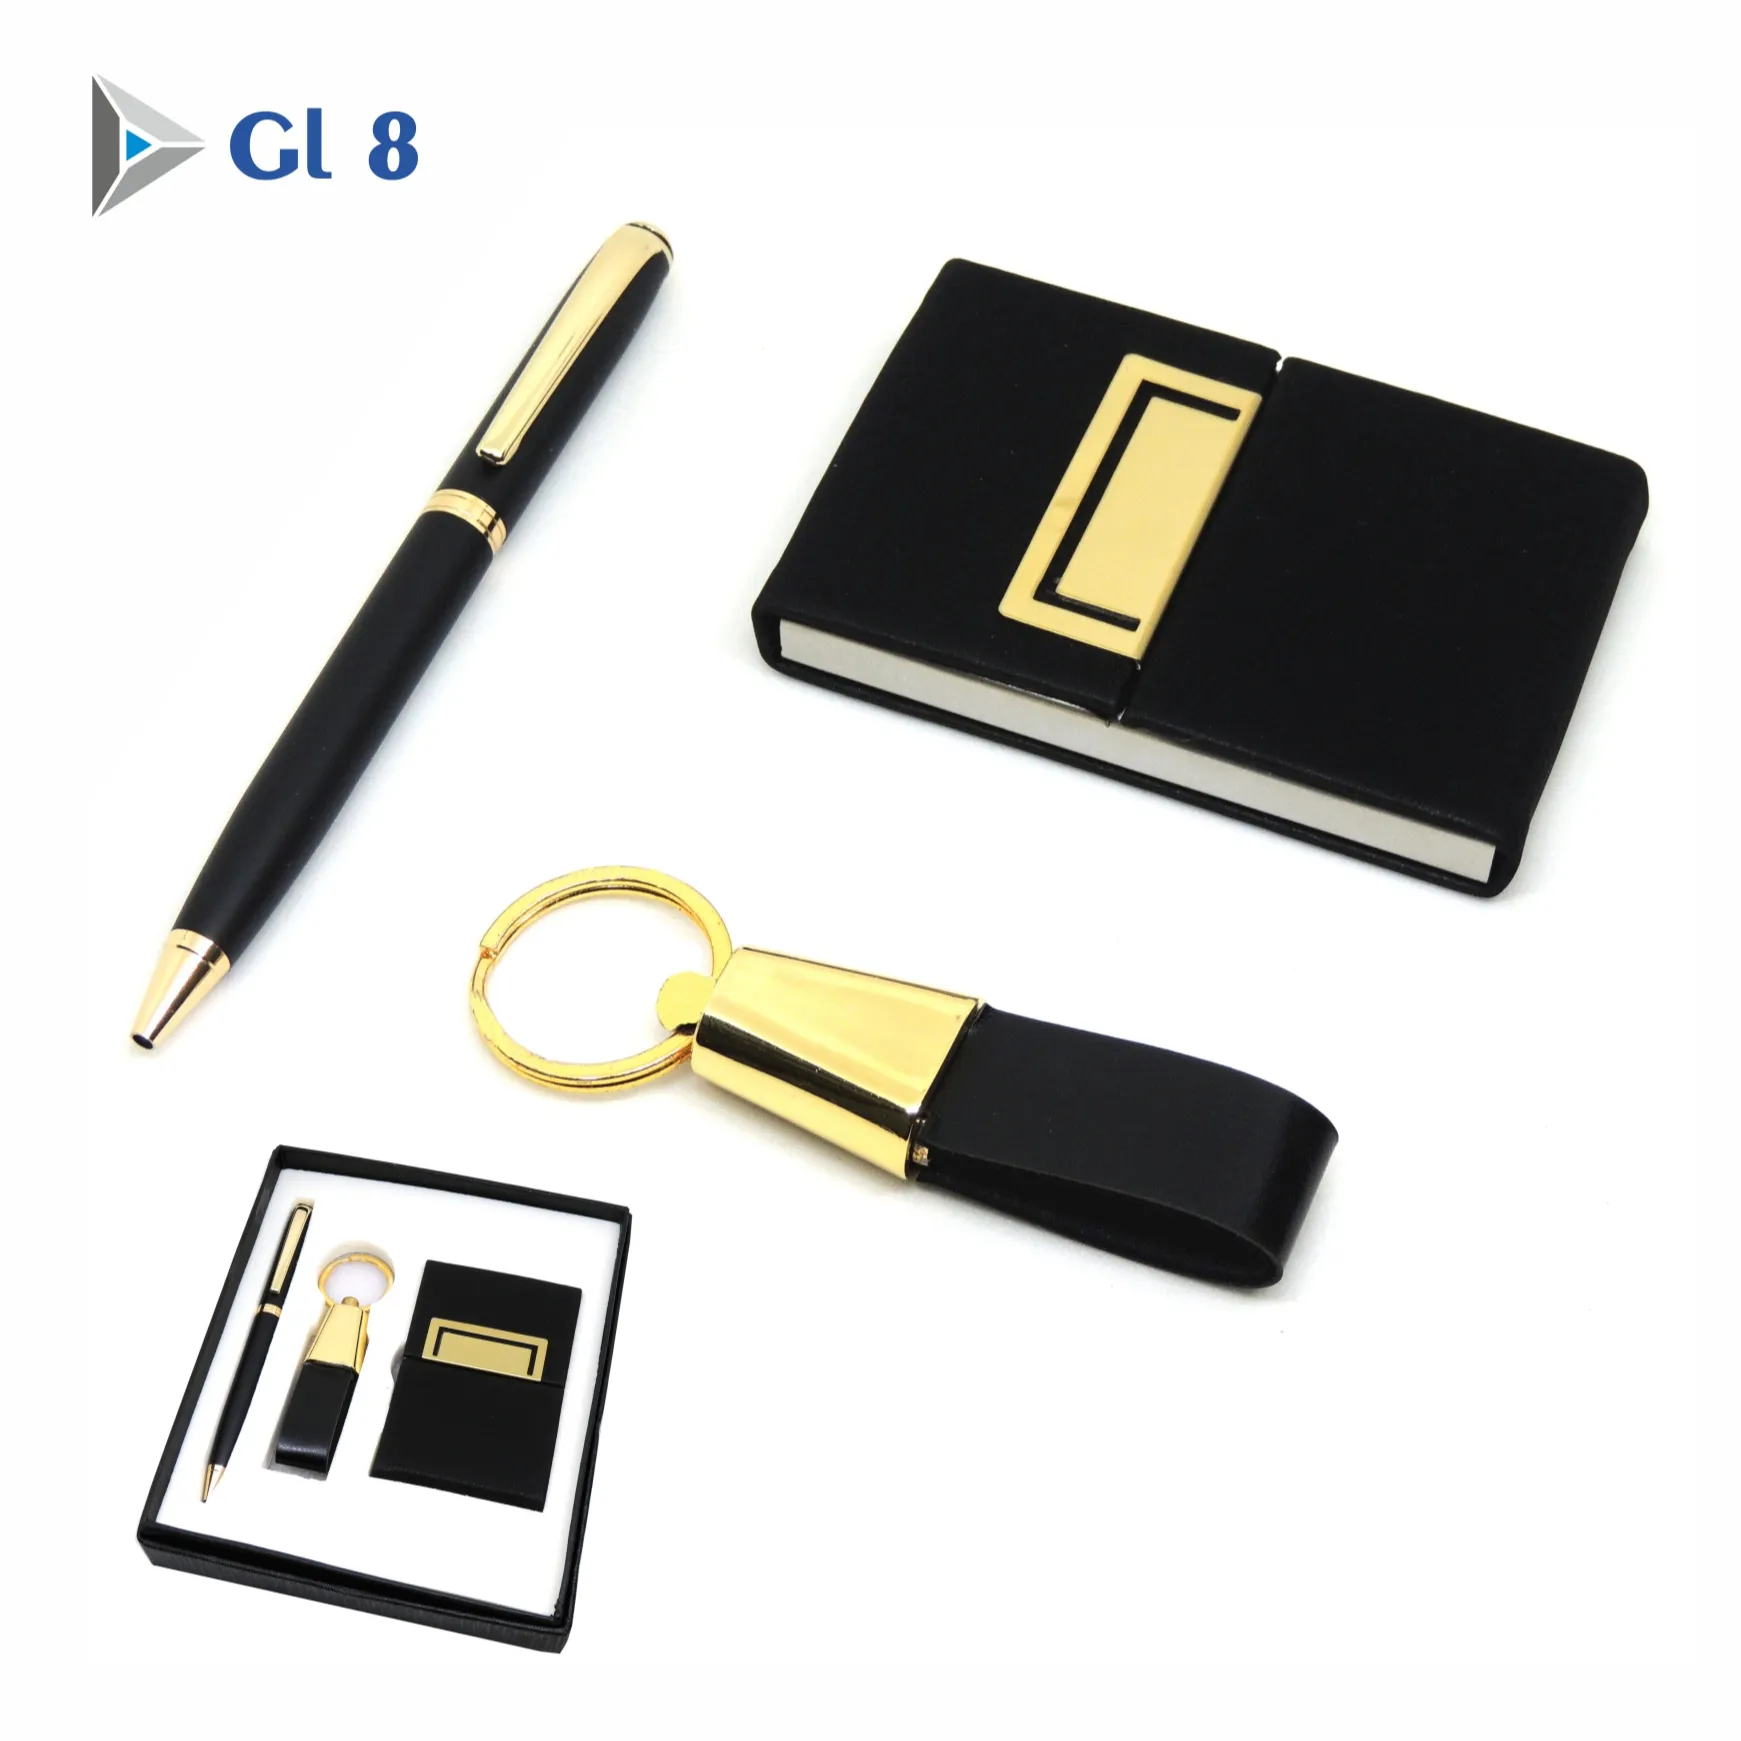 Wholesale Best Customized Business Promotional Gift Premium Gift Metal Pen Keychain and Card Holder Combo Pack Sets for Gift